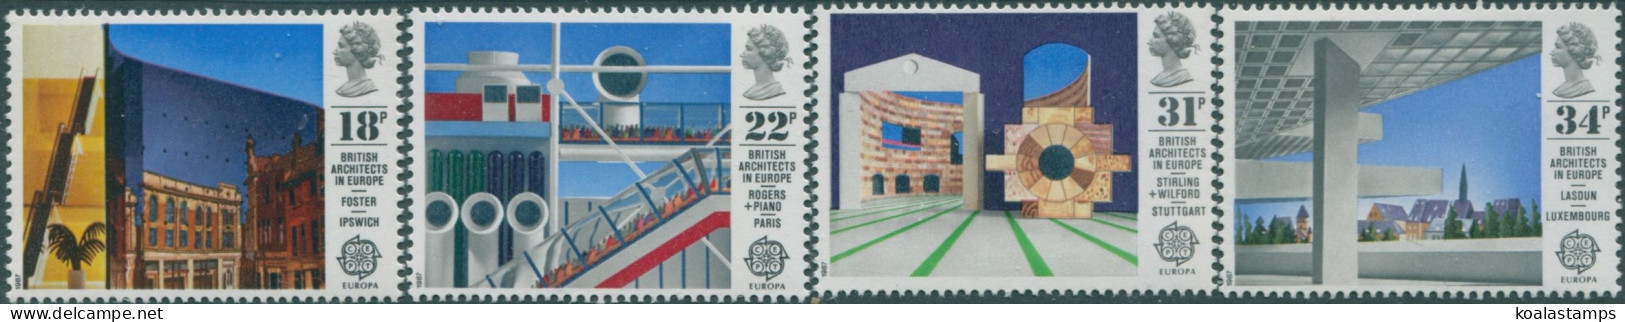 Great Britain 1987 SG1355-1358 QEII Architects In Europe Set MNH - Unclassified